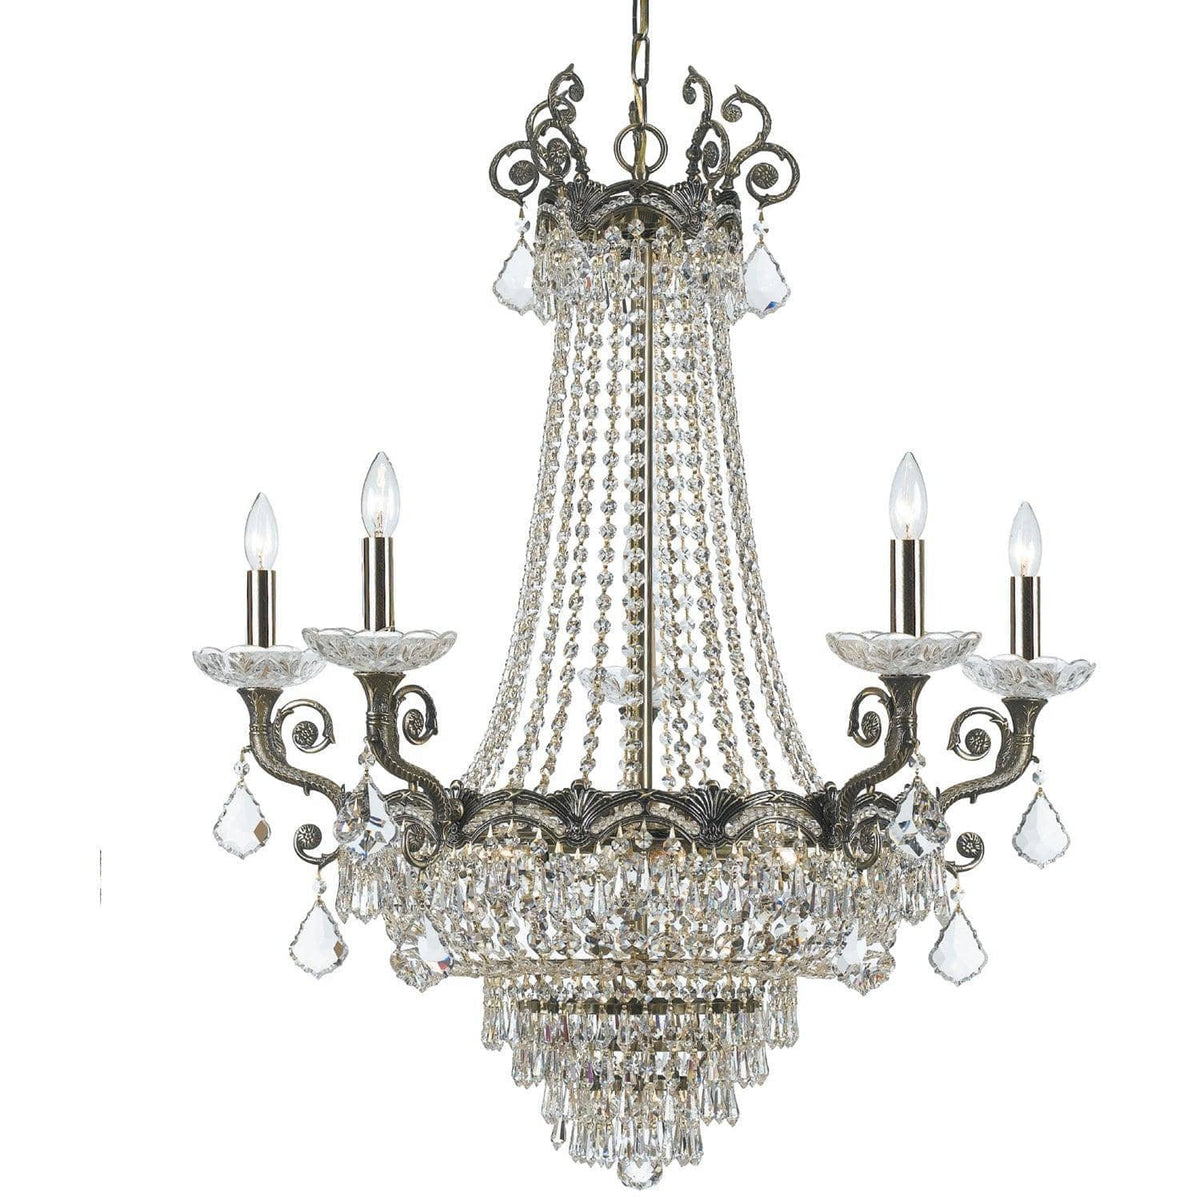 Crystorama - Majestic Chandelier - 1486-HB-CL-MWP | Montreal Lighting & Hardware